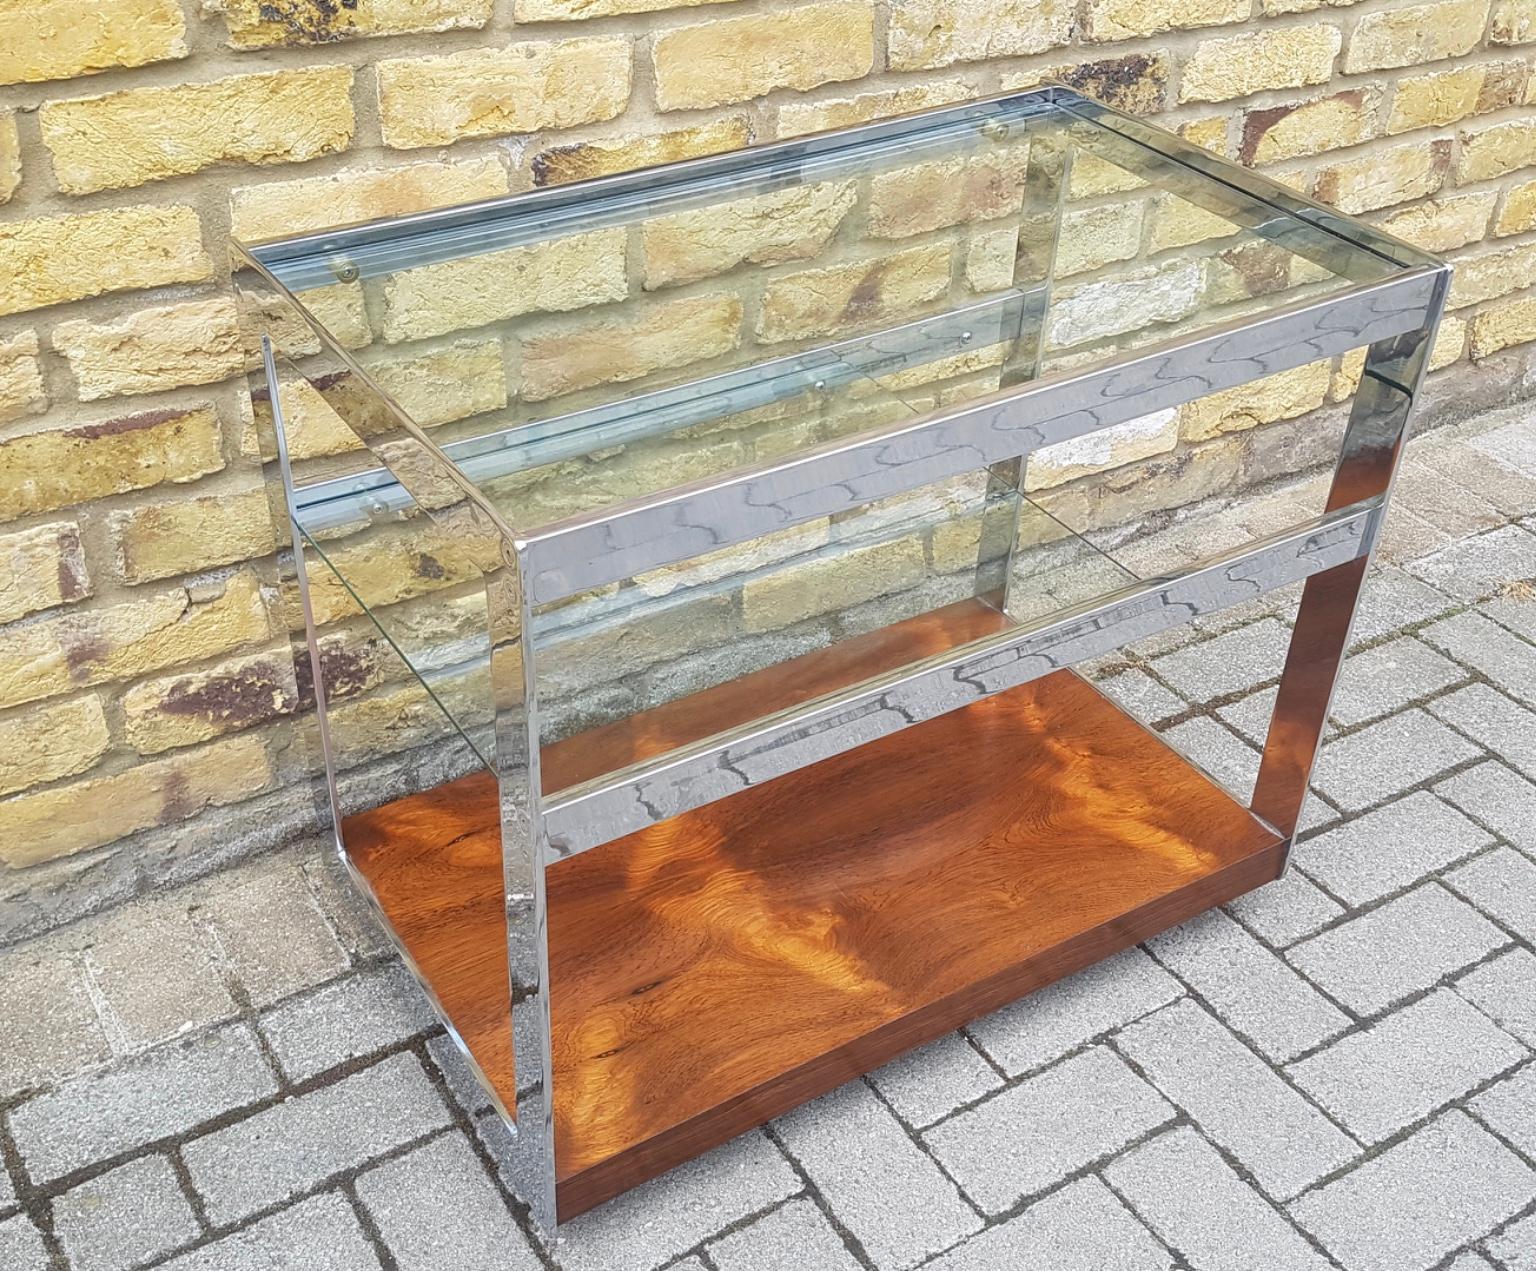 A beautiful and top quality drinks trolley by Merrow Associates, this dates from the 1960s-1970s. It has a very well made chrome frame, thick glass shelves and a stunning rosewood base. The condition is superb for its age, there are just a few minor